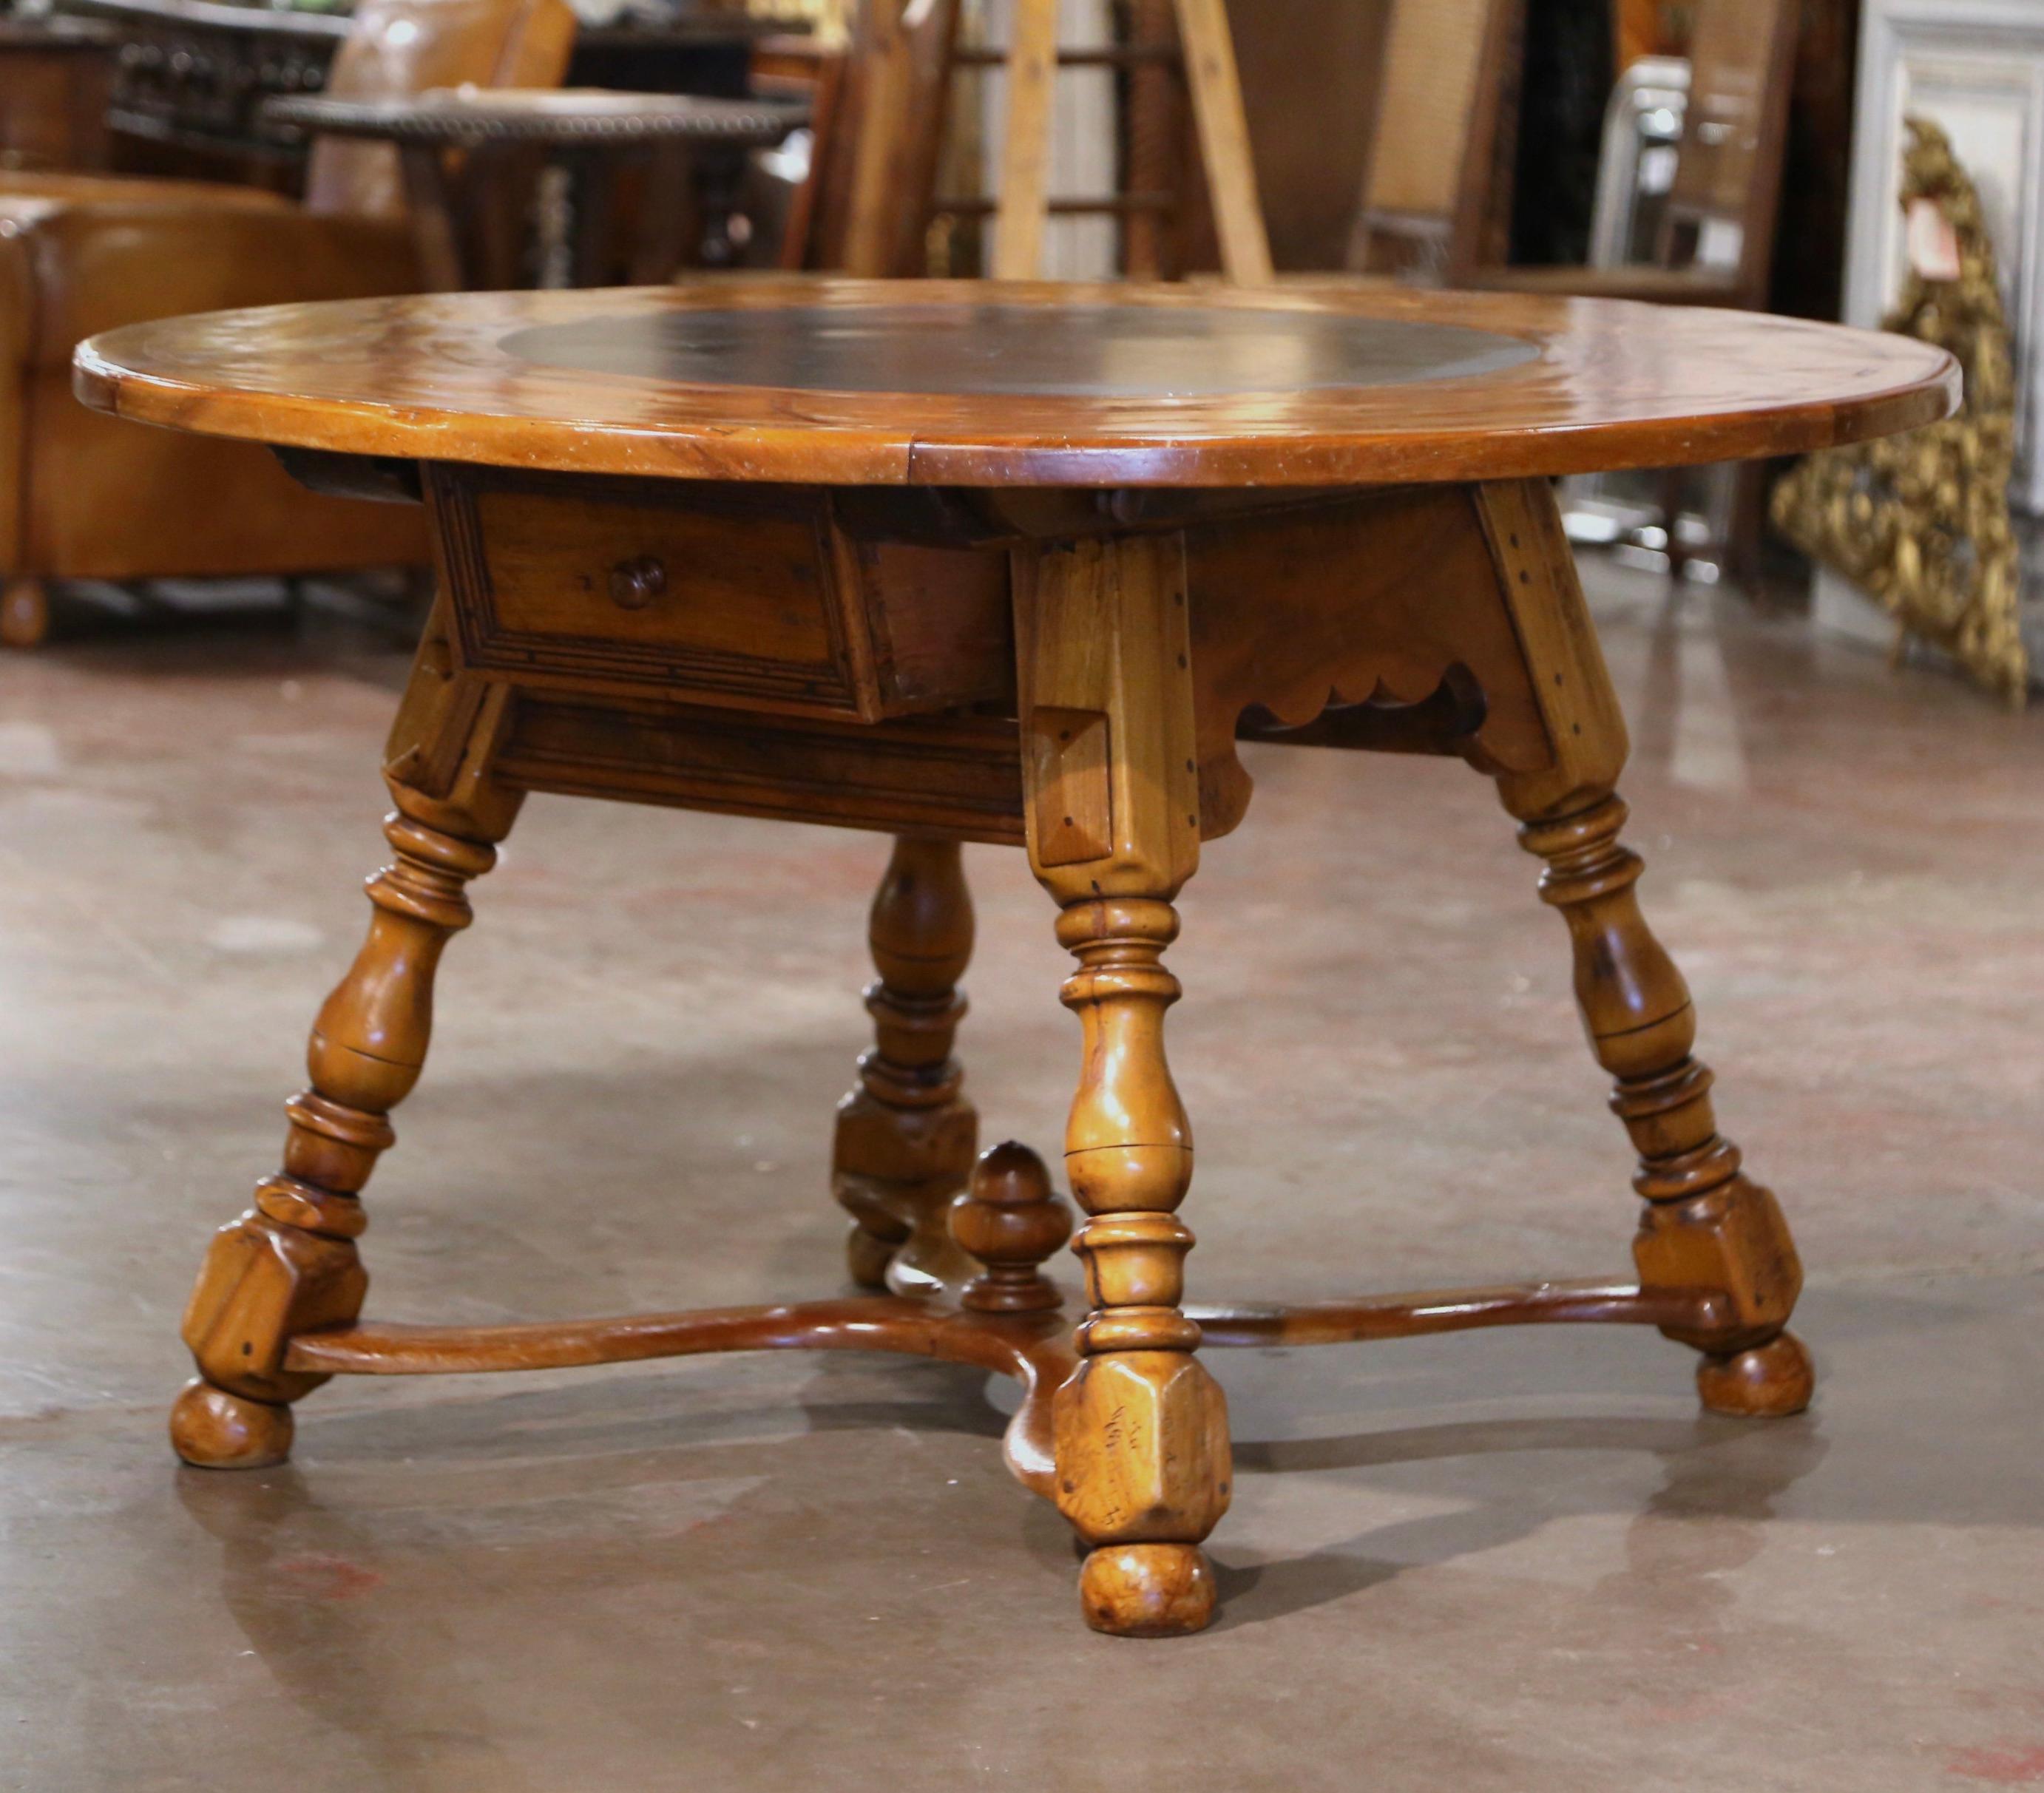 This elegant four foot round table was crafted in France circa 1880. Built of walnut, the table stands on four hand turned legs, connected at the base with an X-shape stretcher. The intricate 2